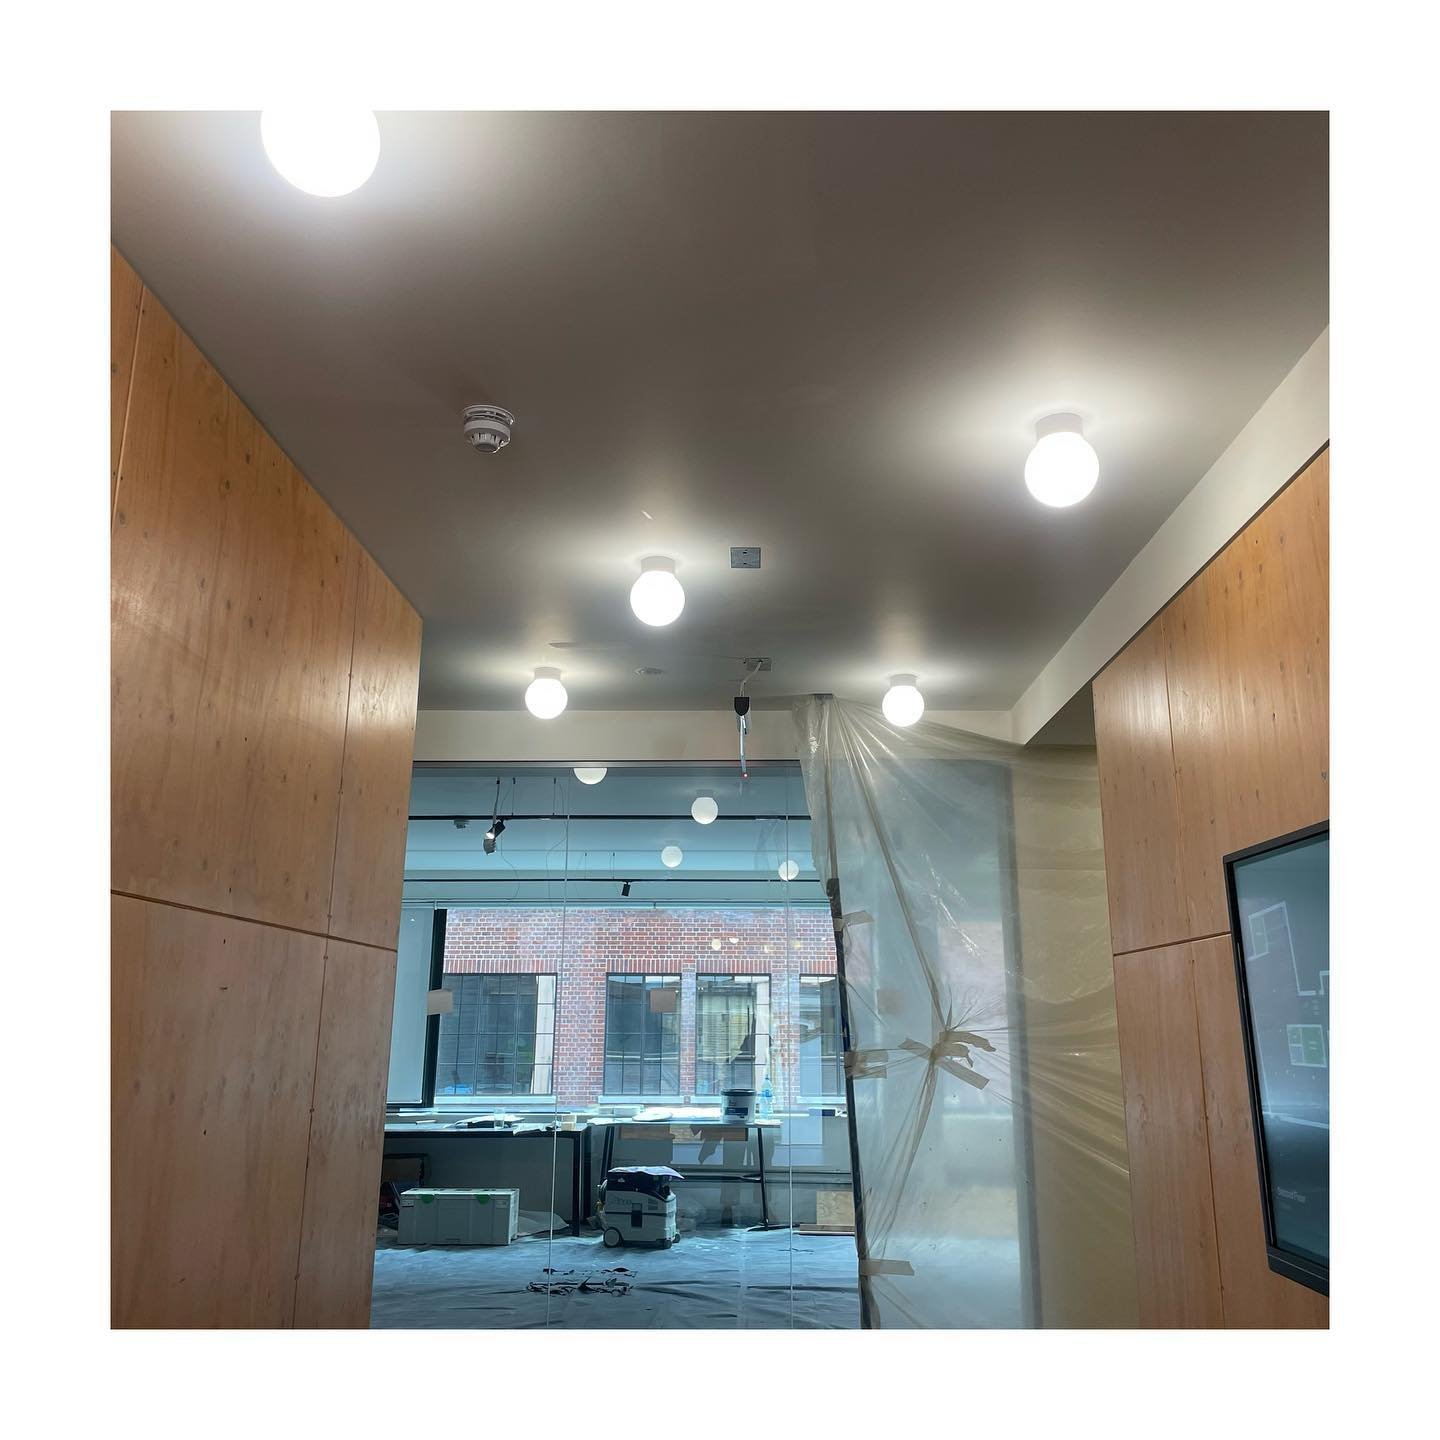 On site, visiting to see a few tweaks and interventions that will improve this office. I&rsquo;m pleased to see this, deceptively simple, new lighting install is on fleek 👌😅 Glad to see this lighting is enlivened and uplifting, as it should be. The